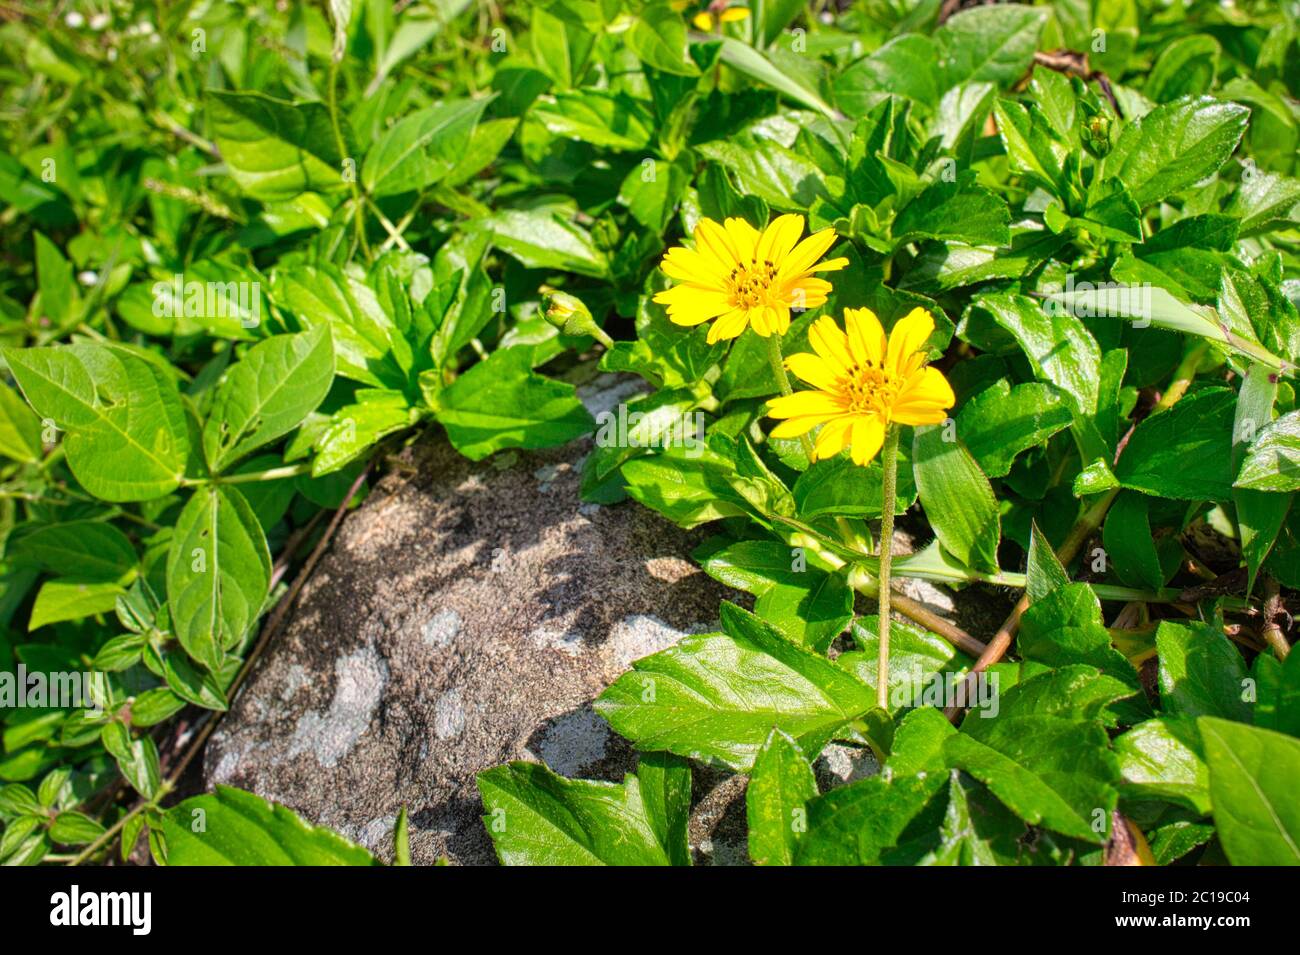 Isolated wedelia flowers, sphagneticola trilobata, with green blurry background Stock Photo